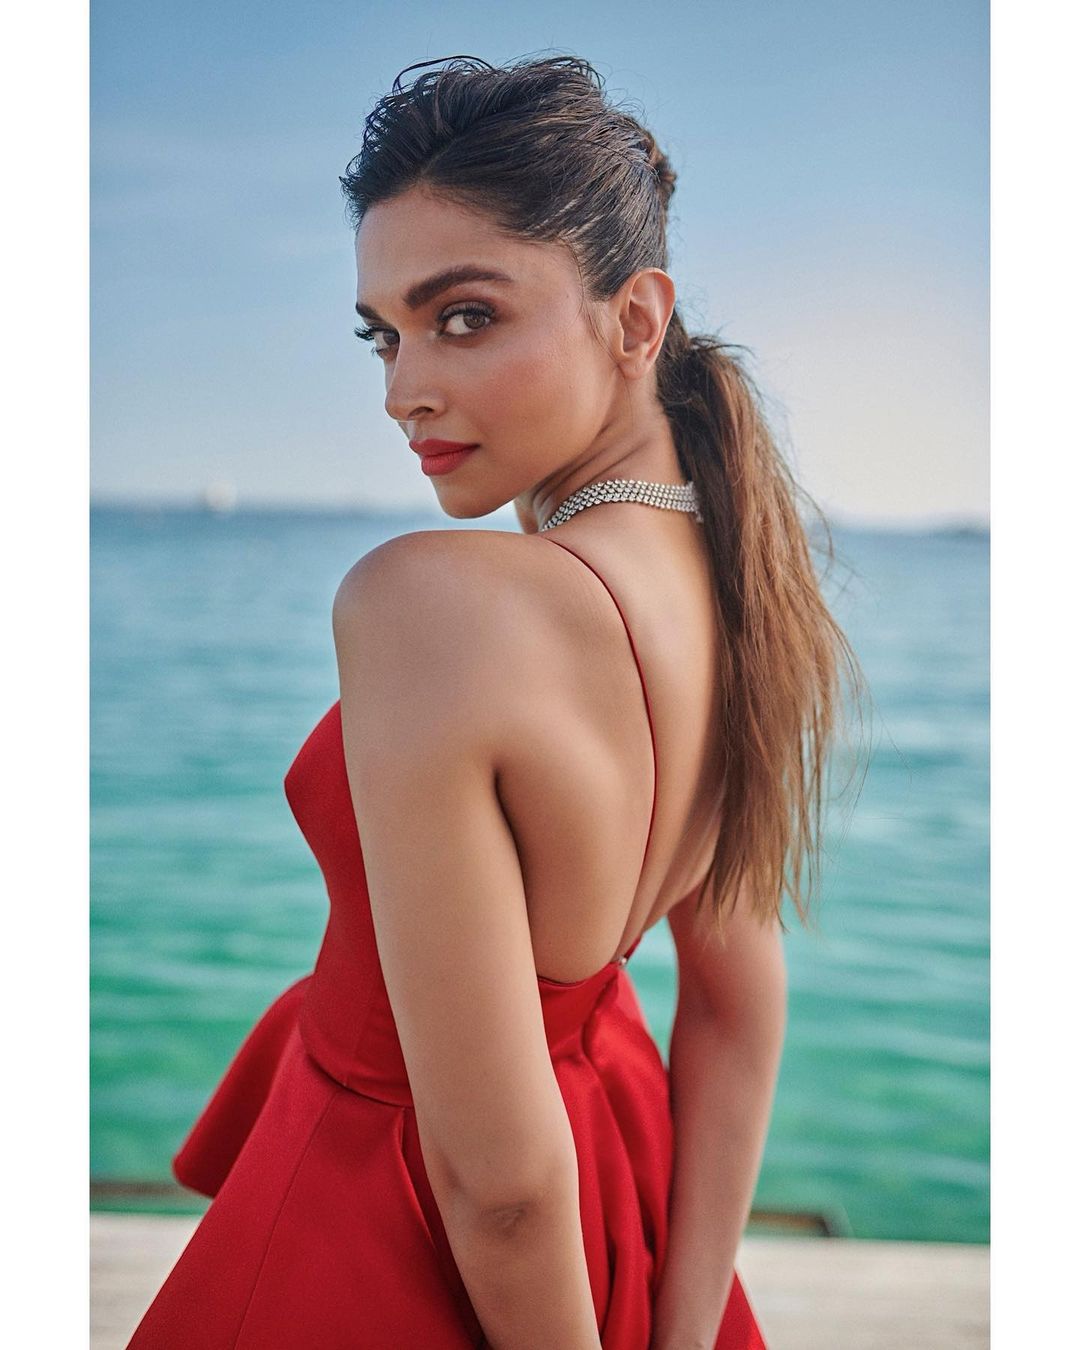 Deepika Padukone went for a messy hairdo and a Cartier necklace. 